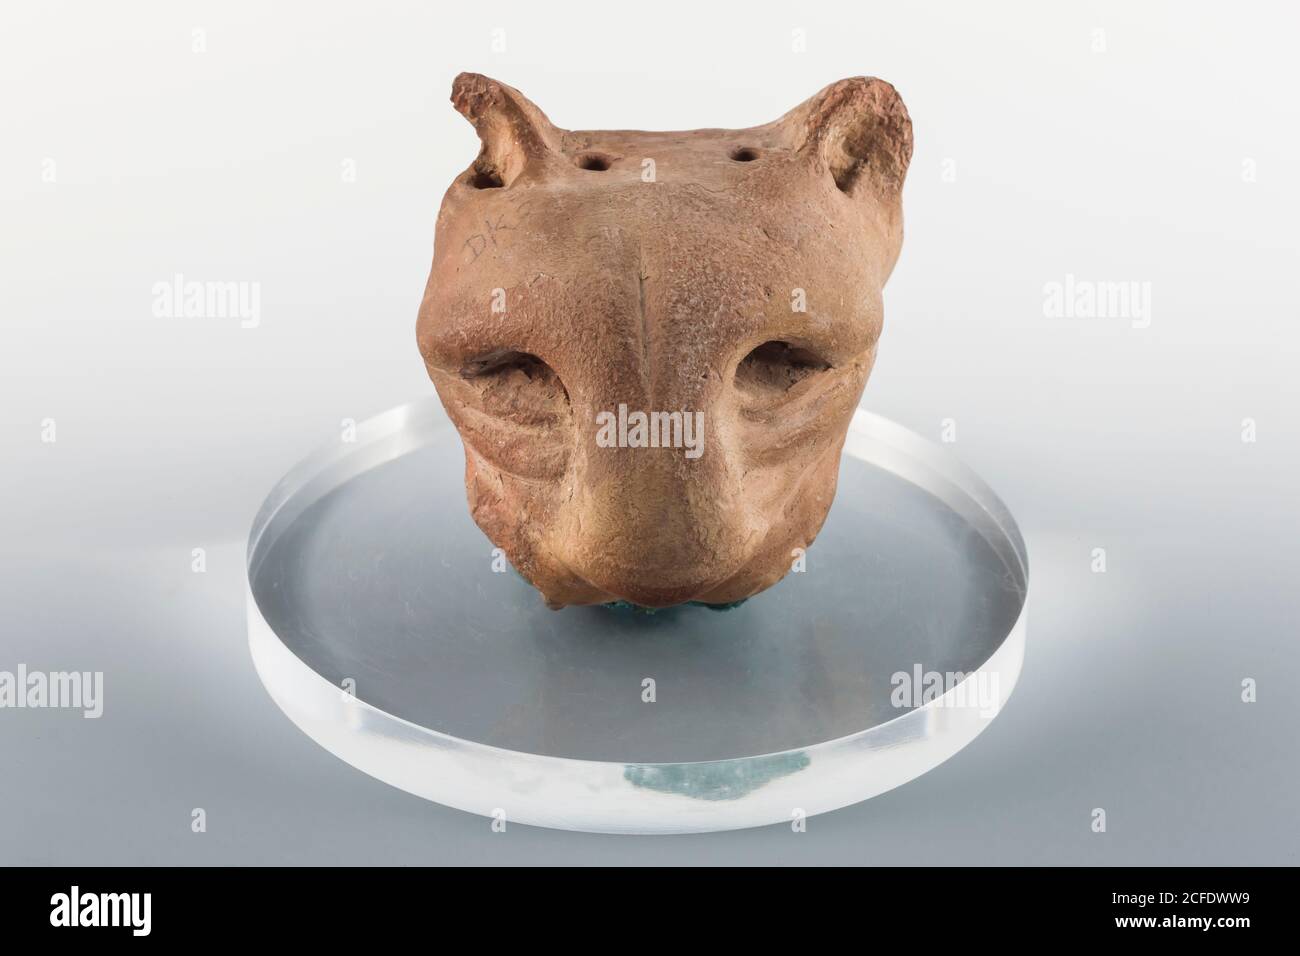 Puppet of Cat Face, from Mohenjo daro, Indus valley civilization Gallery,  National Museum of Pakistan, Karachi, Sindh, Pakistan, South Asia, Asia  Stock Photo - Alamy